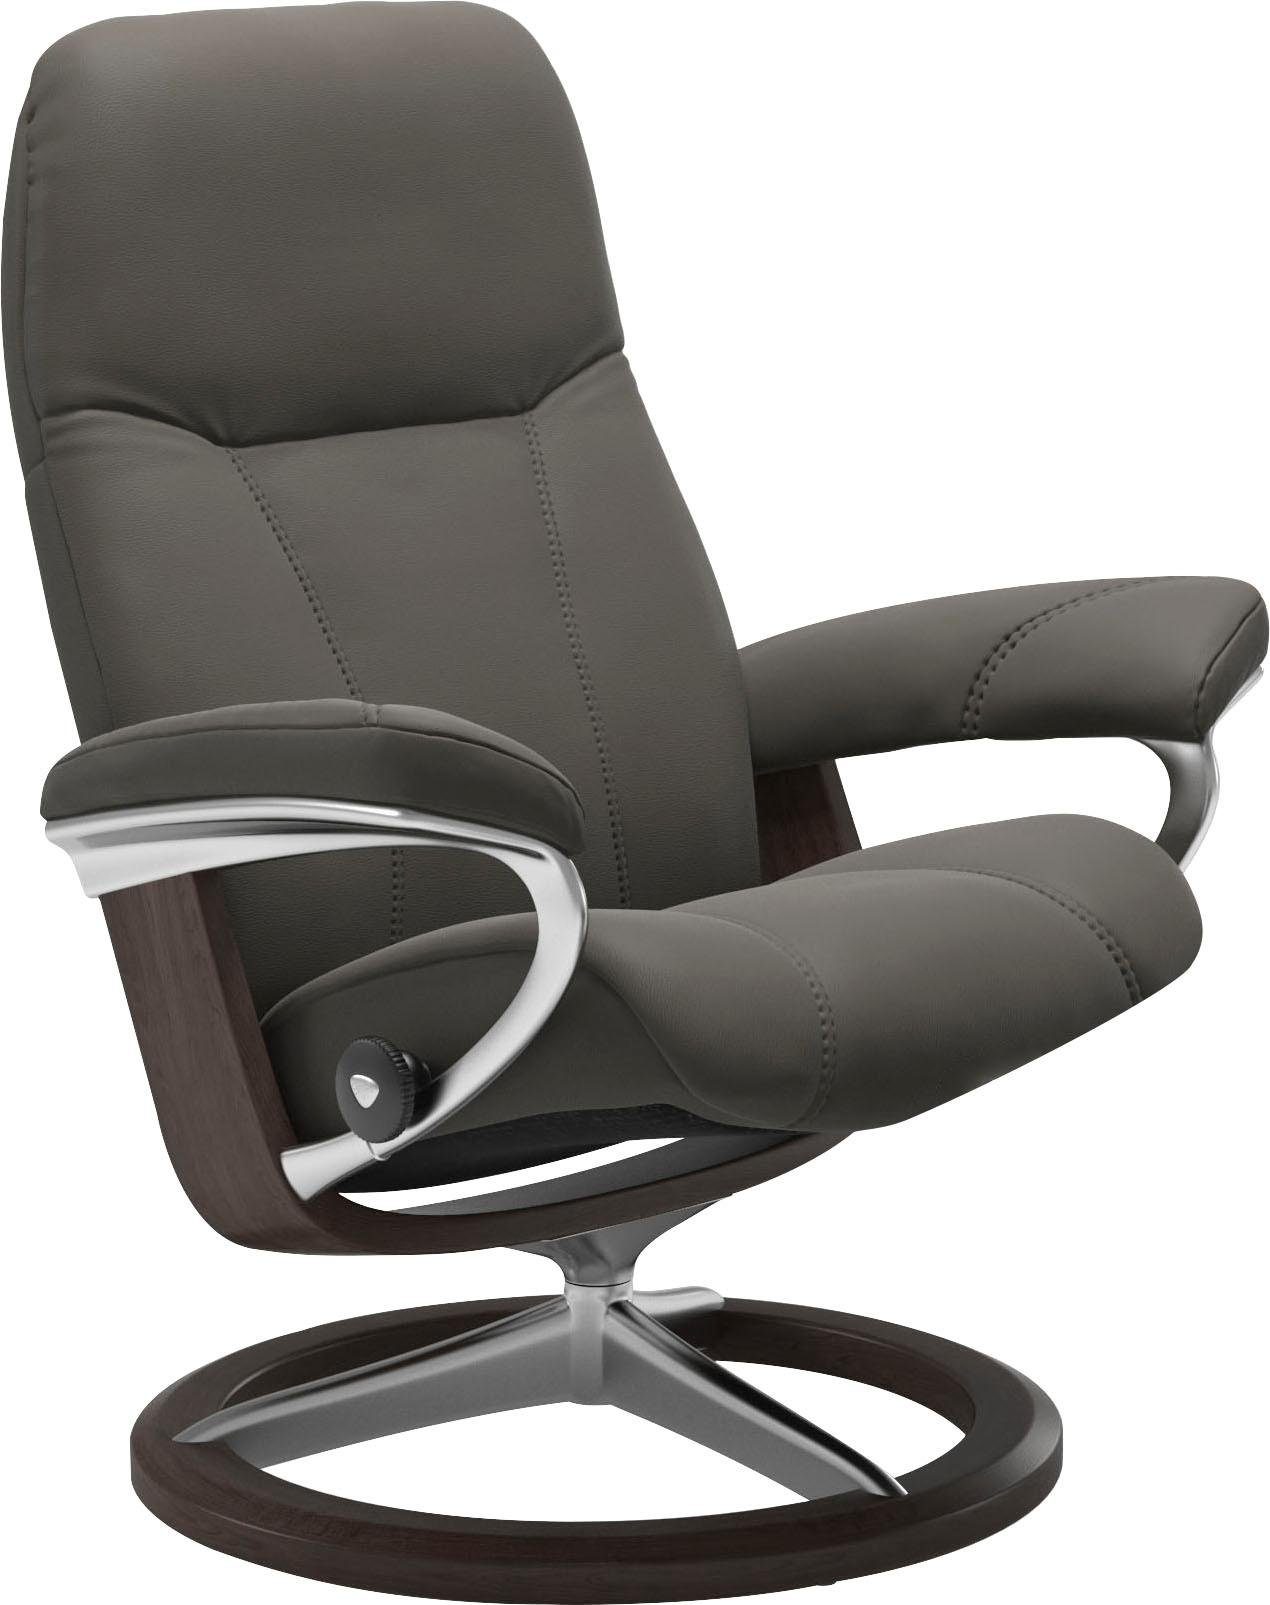 Relaxsessel mit Base, Consul, Gestell L, Wenge Größe Signature Stressless®